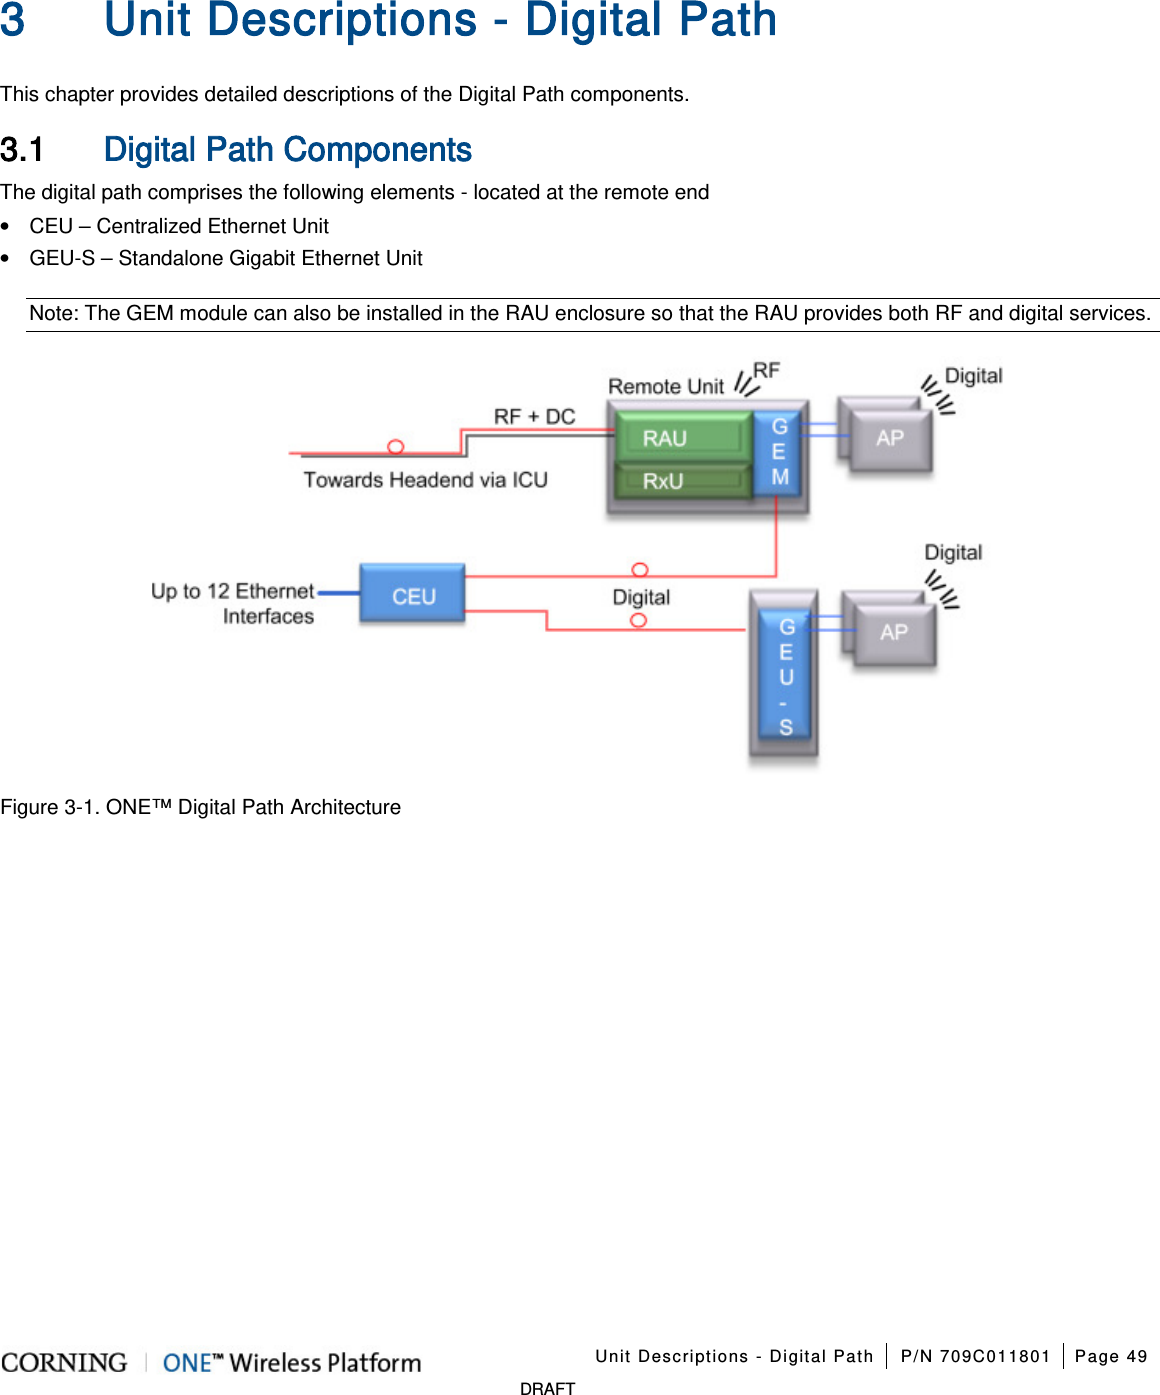    Unit Descriptions - Digital Path P/N 709C011801 Page 49   DRAFT 3 Unit Descriptions - Digital Path This chapter provides detailed descriptions of the Digital Path components.    3.1 Digital Path Components The digital path comprises the following elements - located at the remote end • CEU – Centralized Ethernet Unit • GEU-S – Standalone Gigabit Ethernet Unit   Note: The GEM module can also be installed in the RAU enclosure so that the RAU provides both RF and digital services.  Figure  3-1. ONE™ Digital Path Architecture  